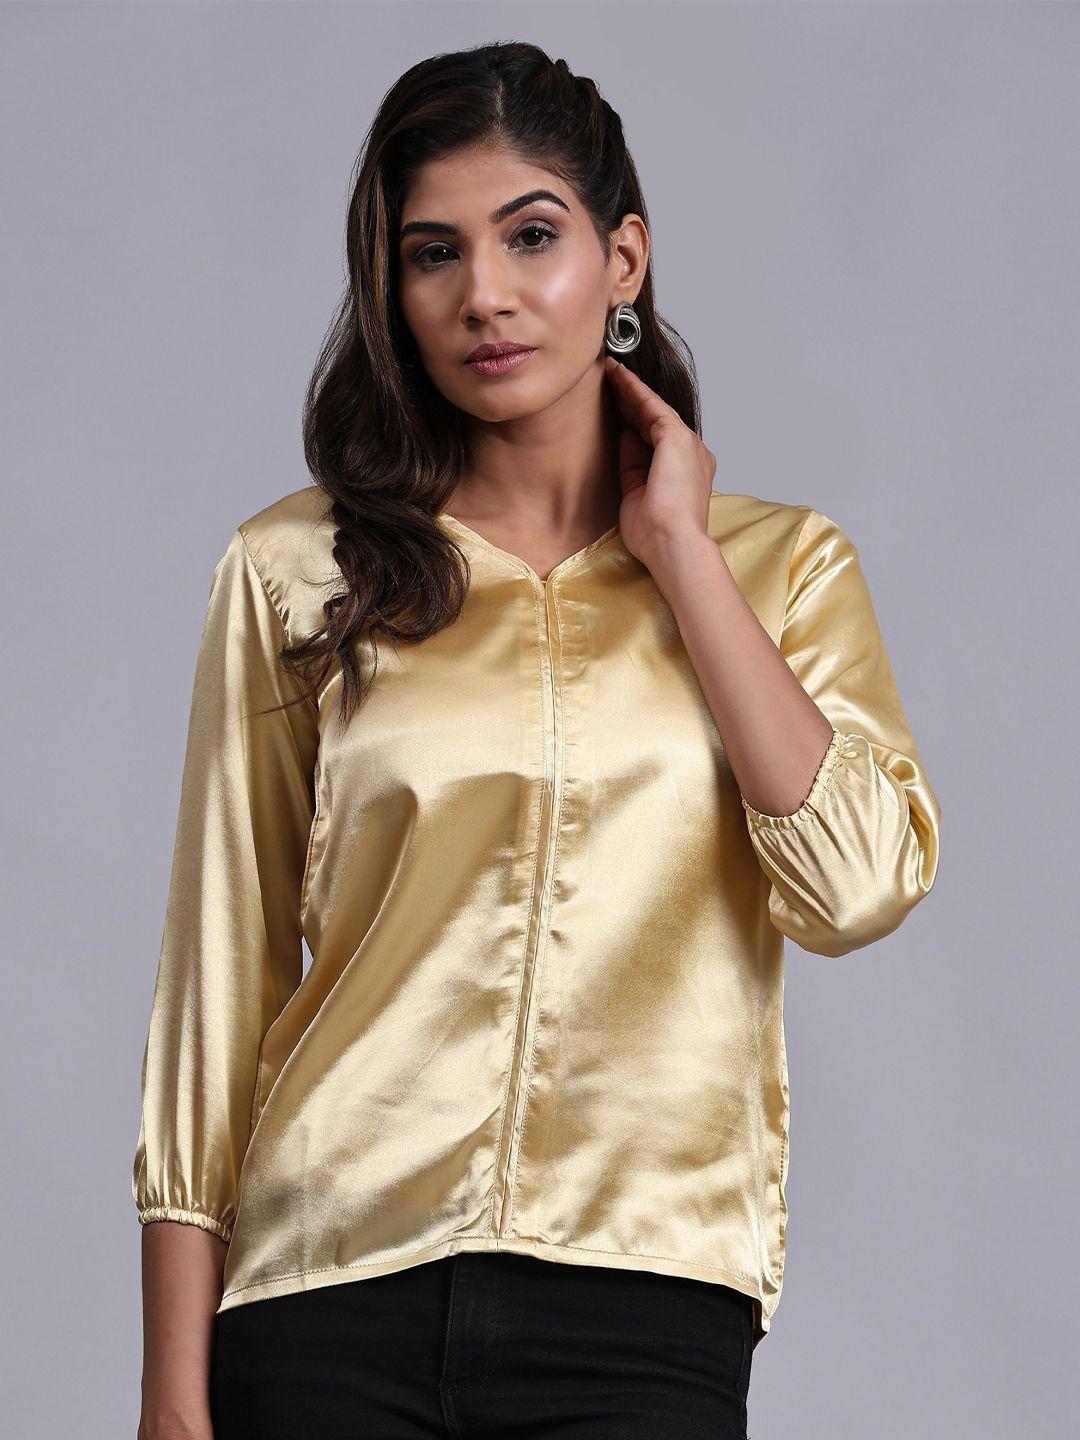 v tradition gold-toned satin shirt style top